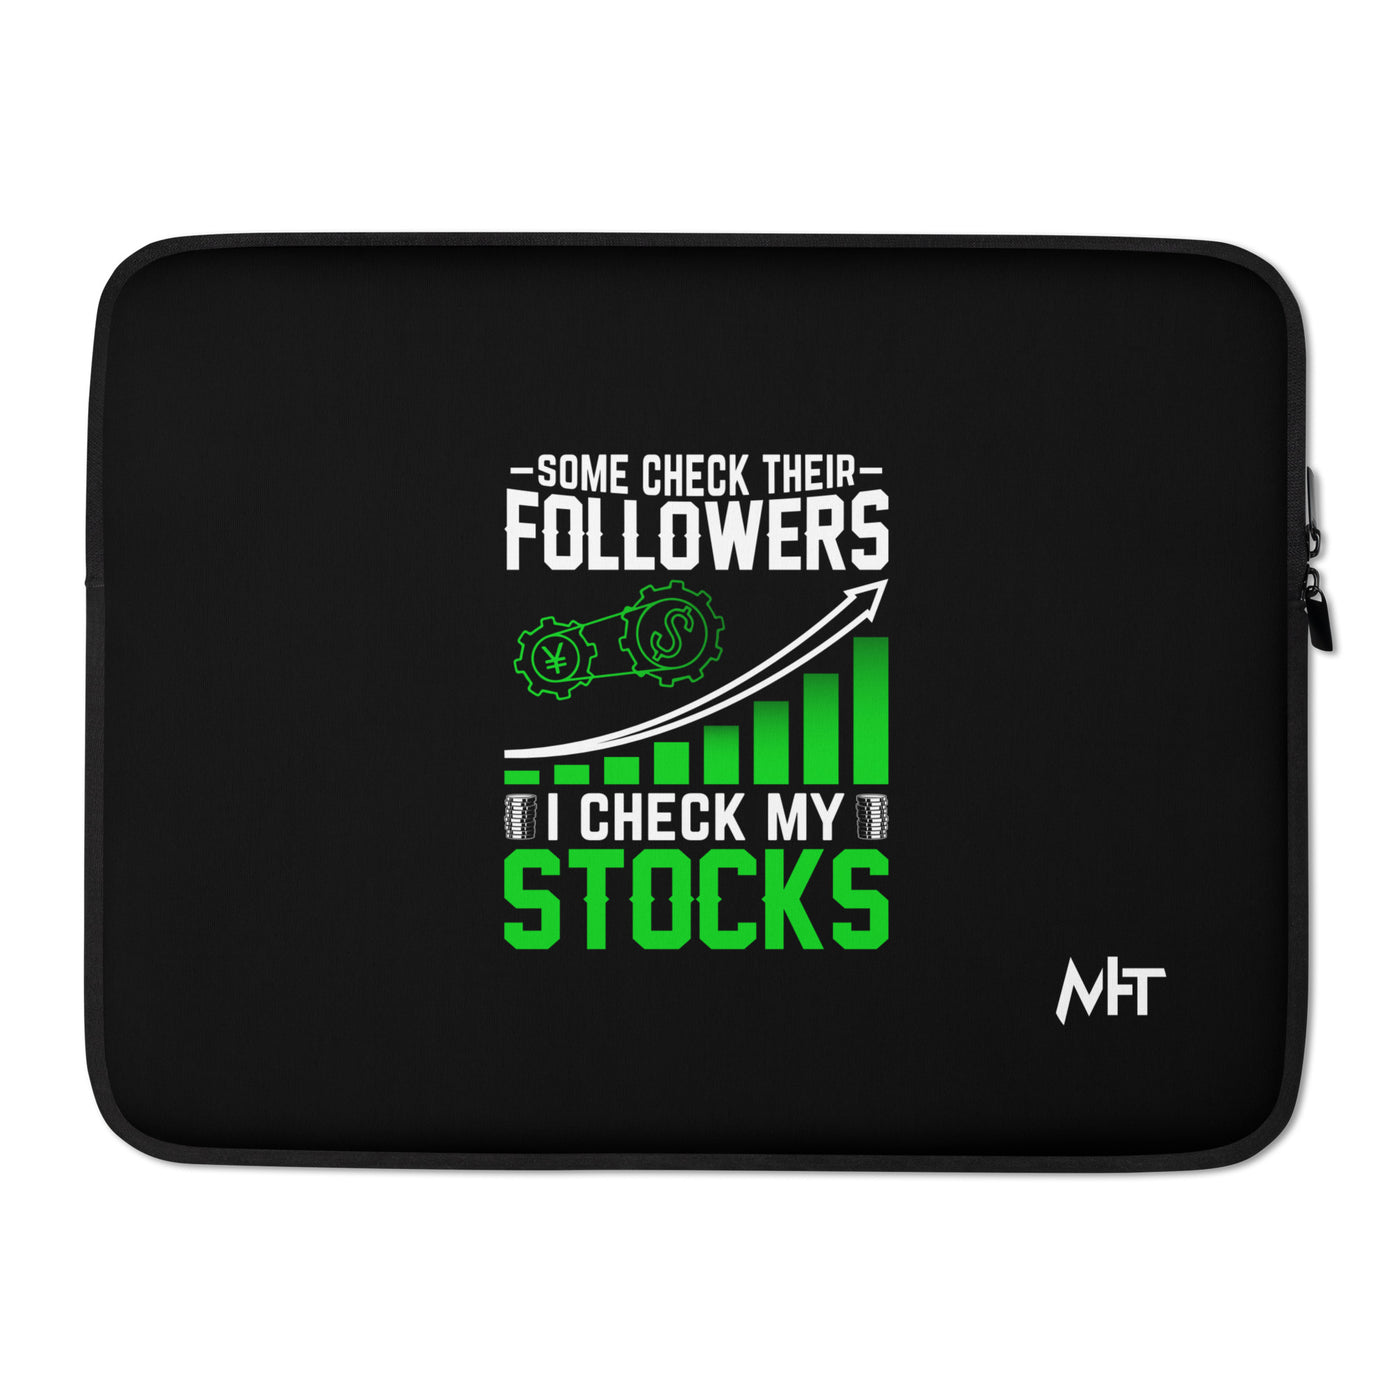 Some Check their followers; I Check my Stocks - Laptop Sleeve